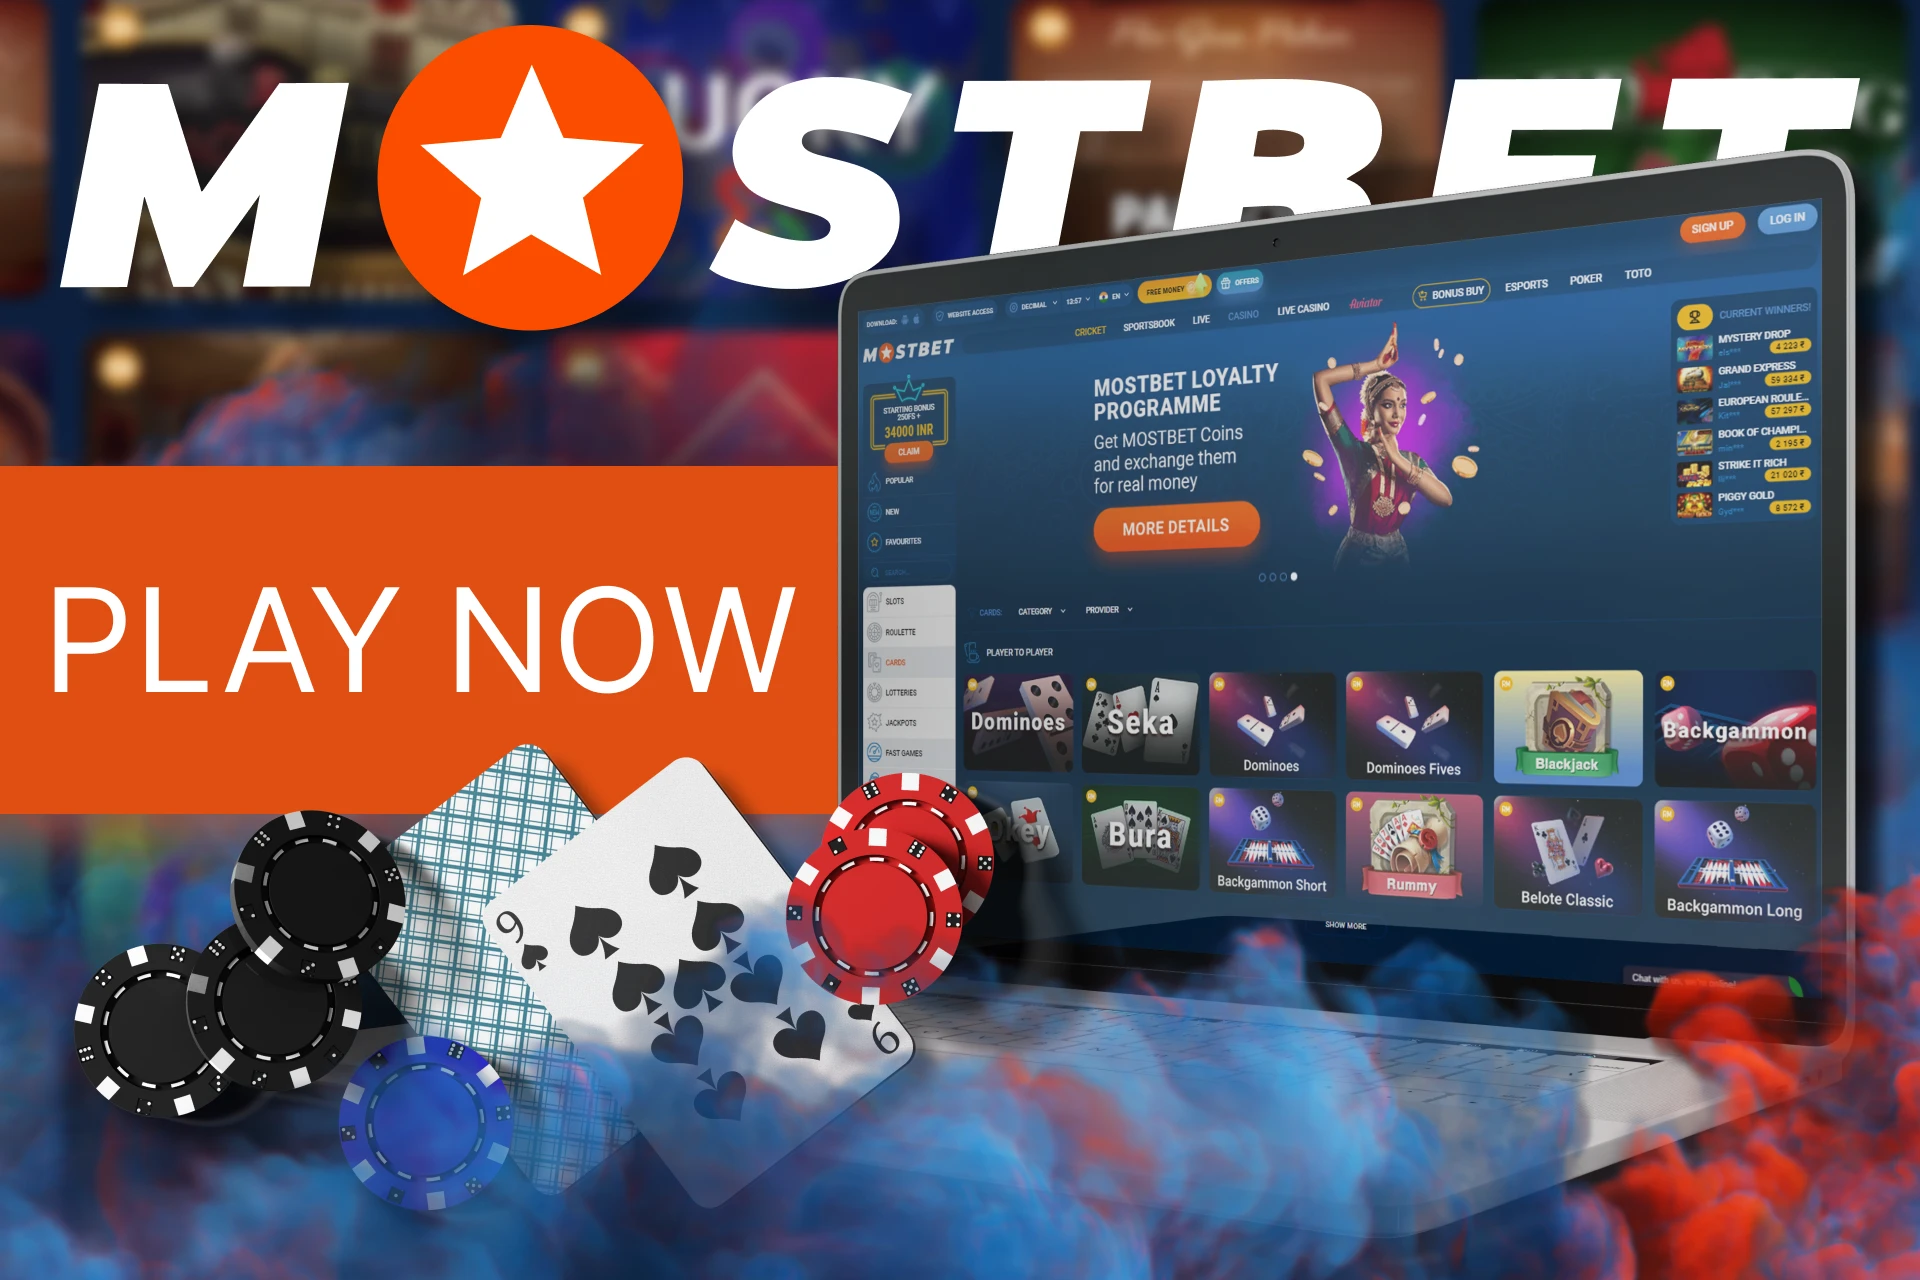 Find out how easy it is to start playing cards at Mostbet.